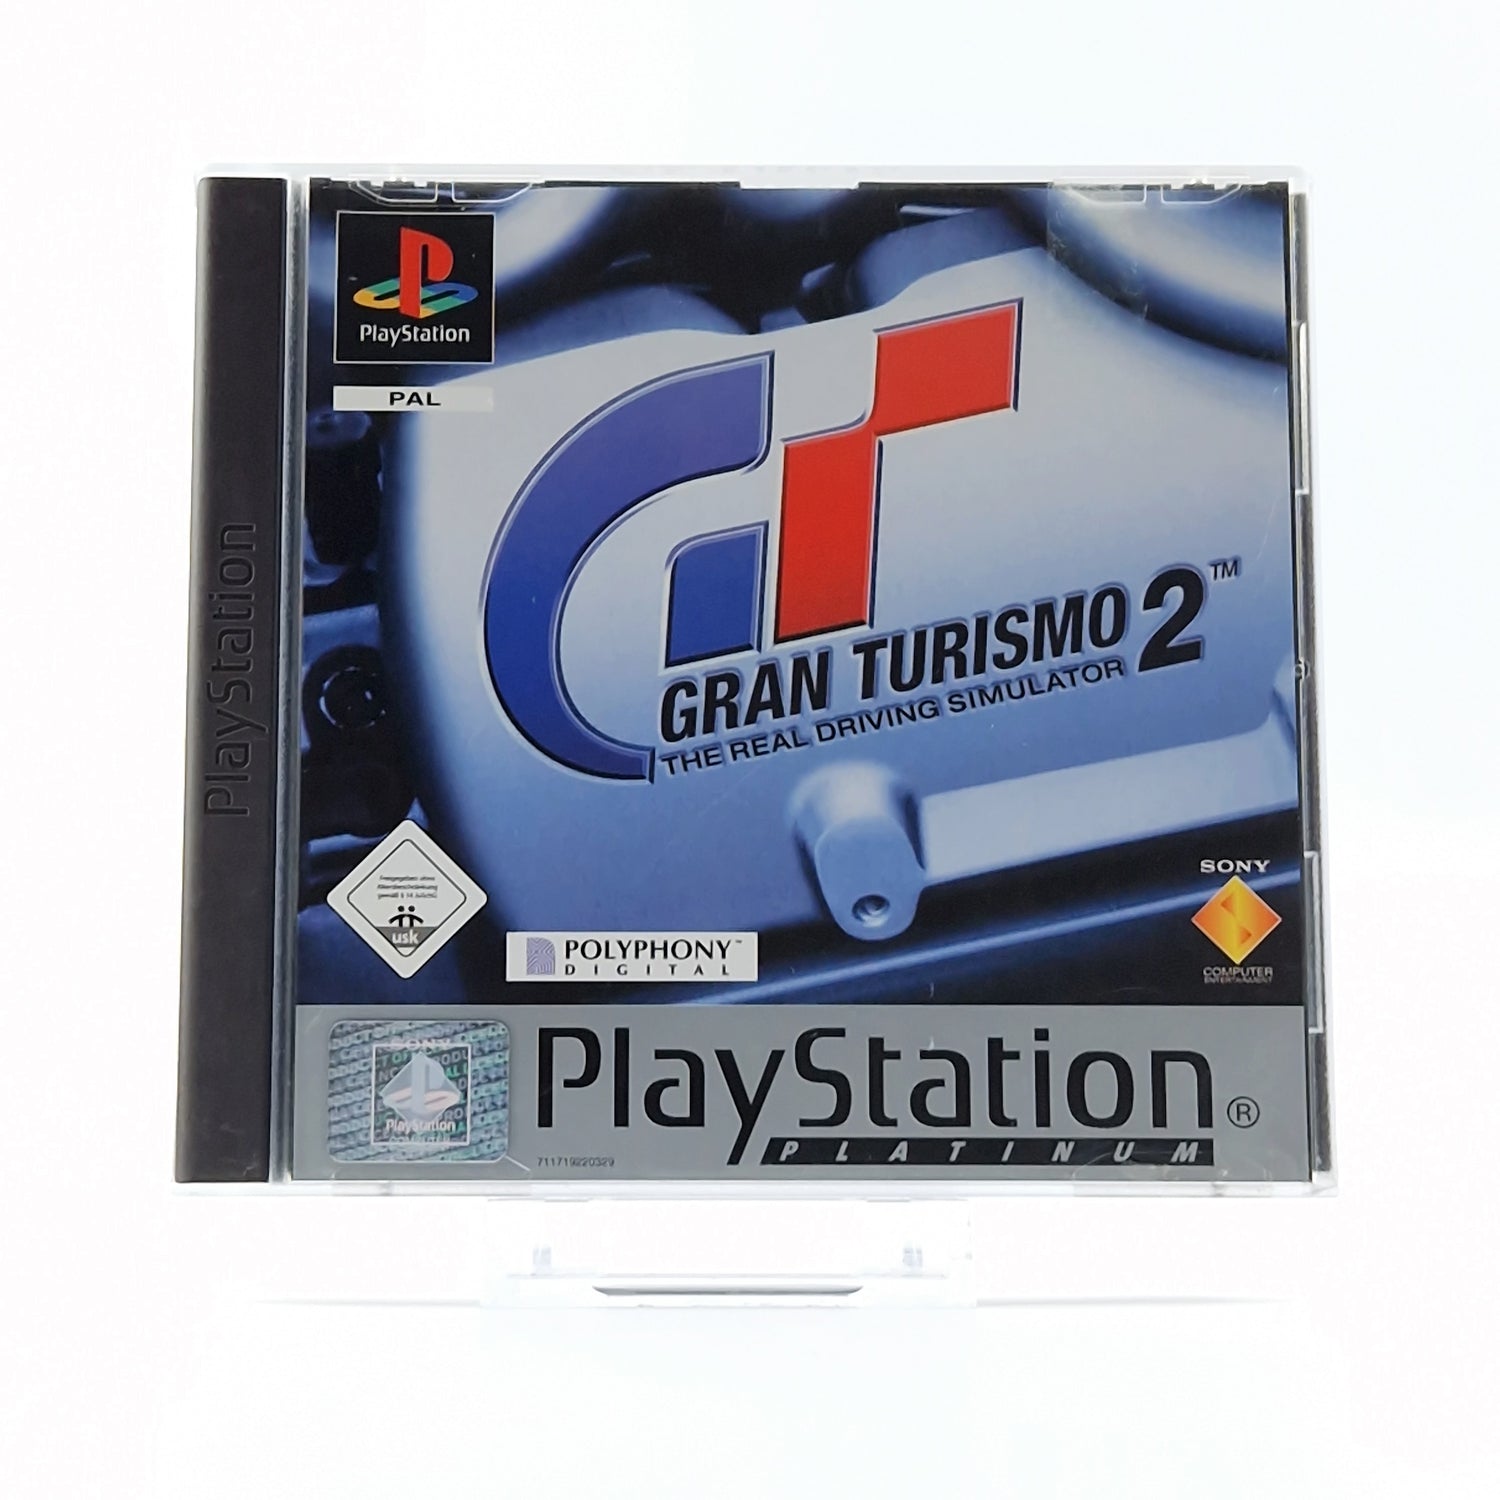 Playstation 1 game: Gran Turismo 2 - CD instructions OVP / SONY PS1 Psx PAL